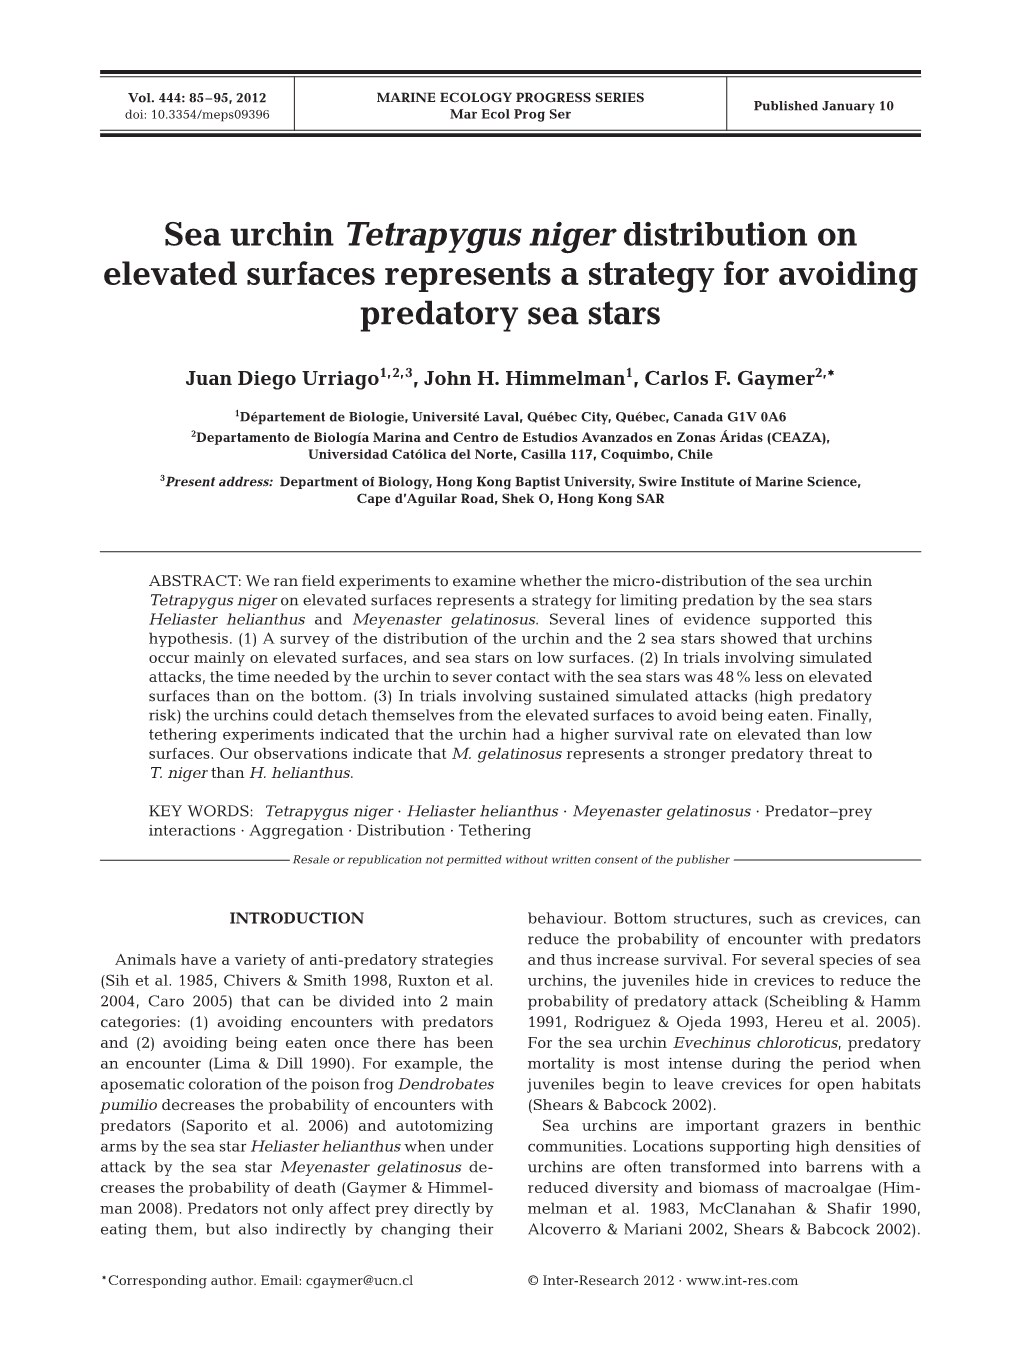 Sea Urchin Tetrapygus Niger Distribution on Elevated Surfaces Represents a Strategy for Avoiding Predatory Sea Stars